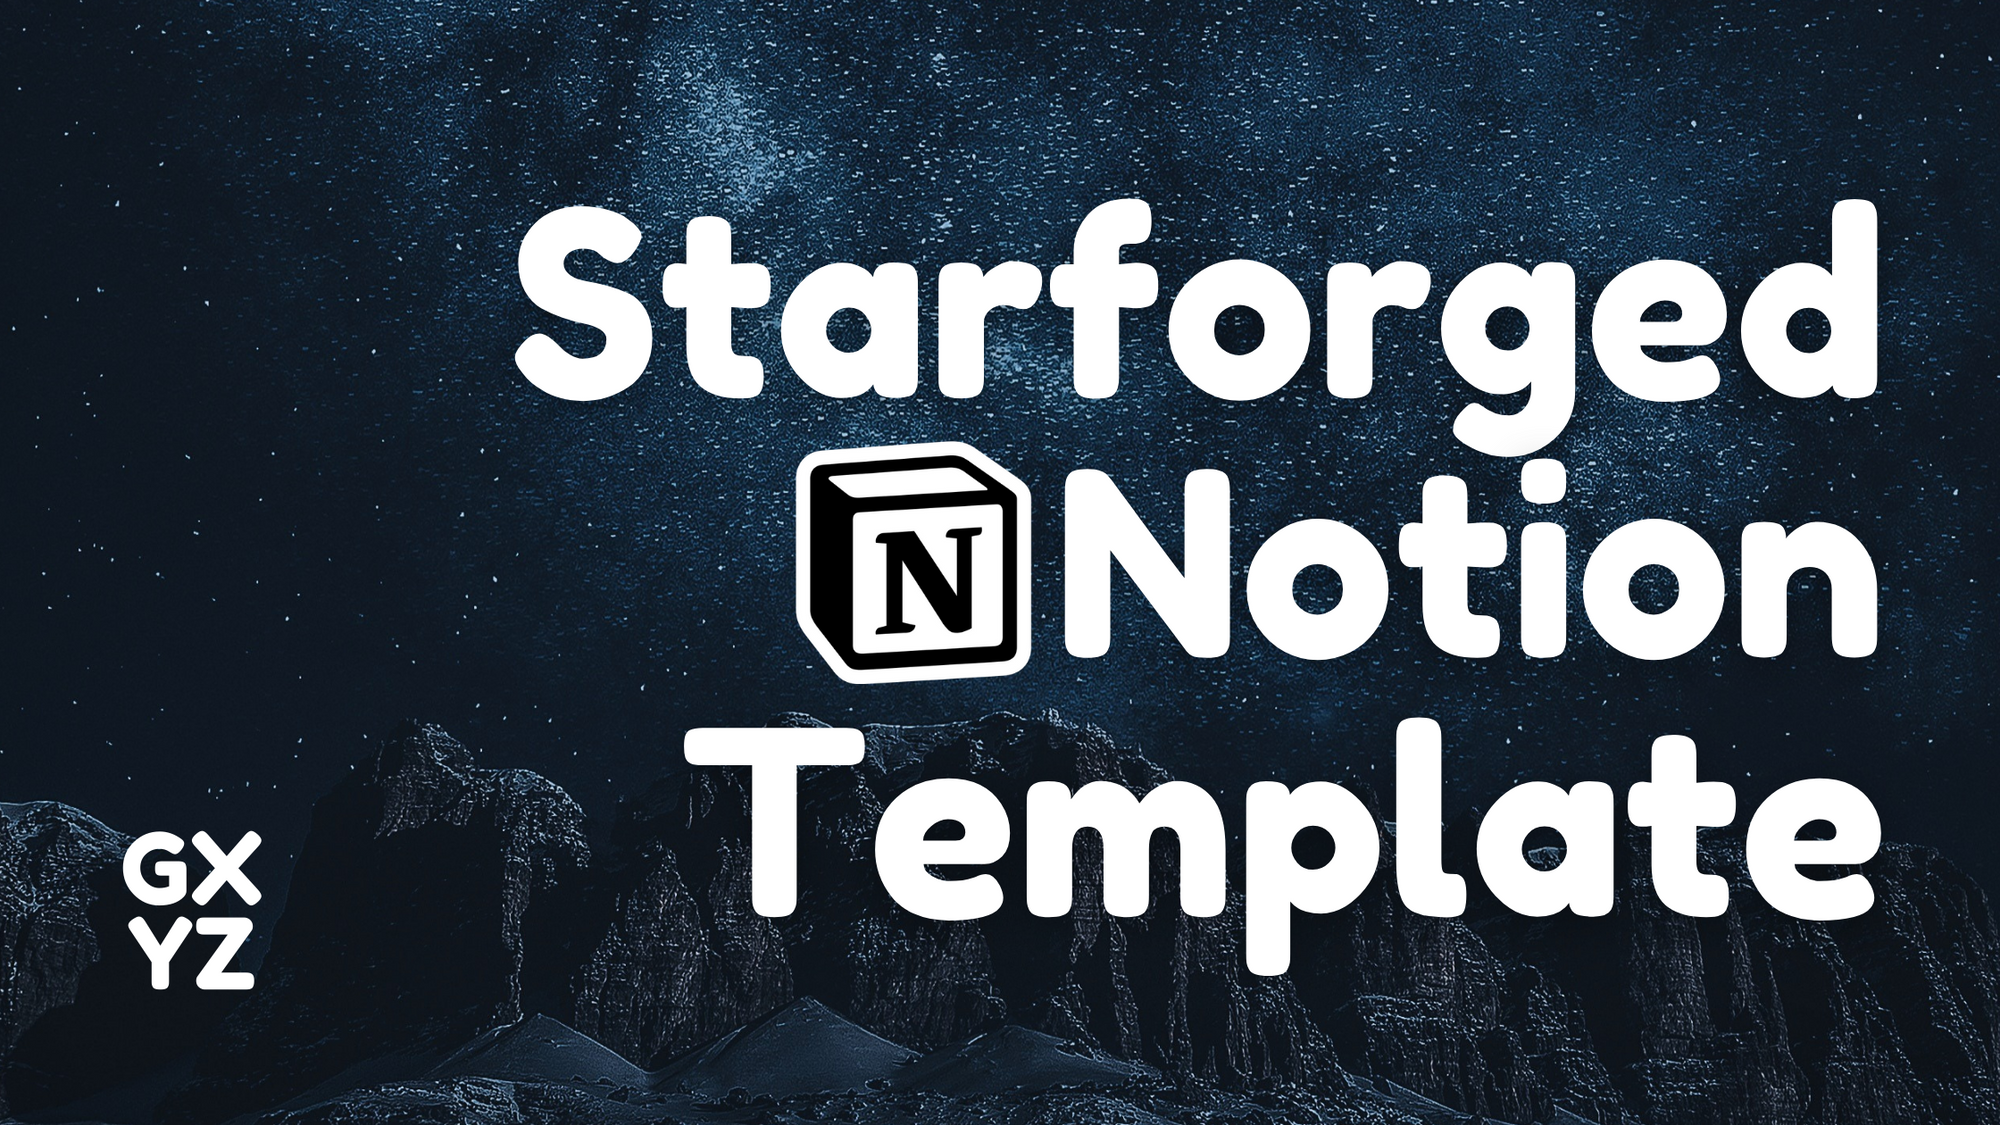 Starforged Notion Template